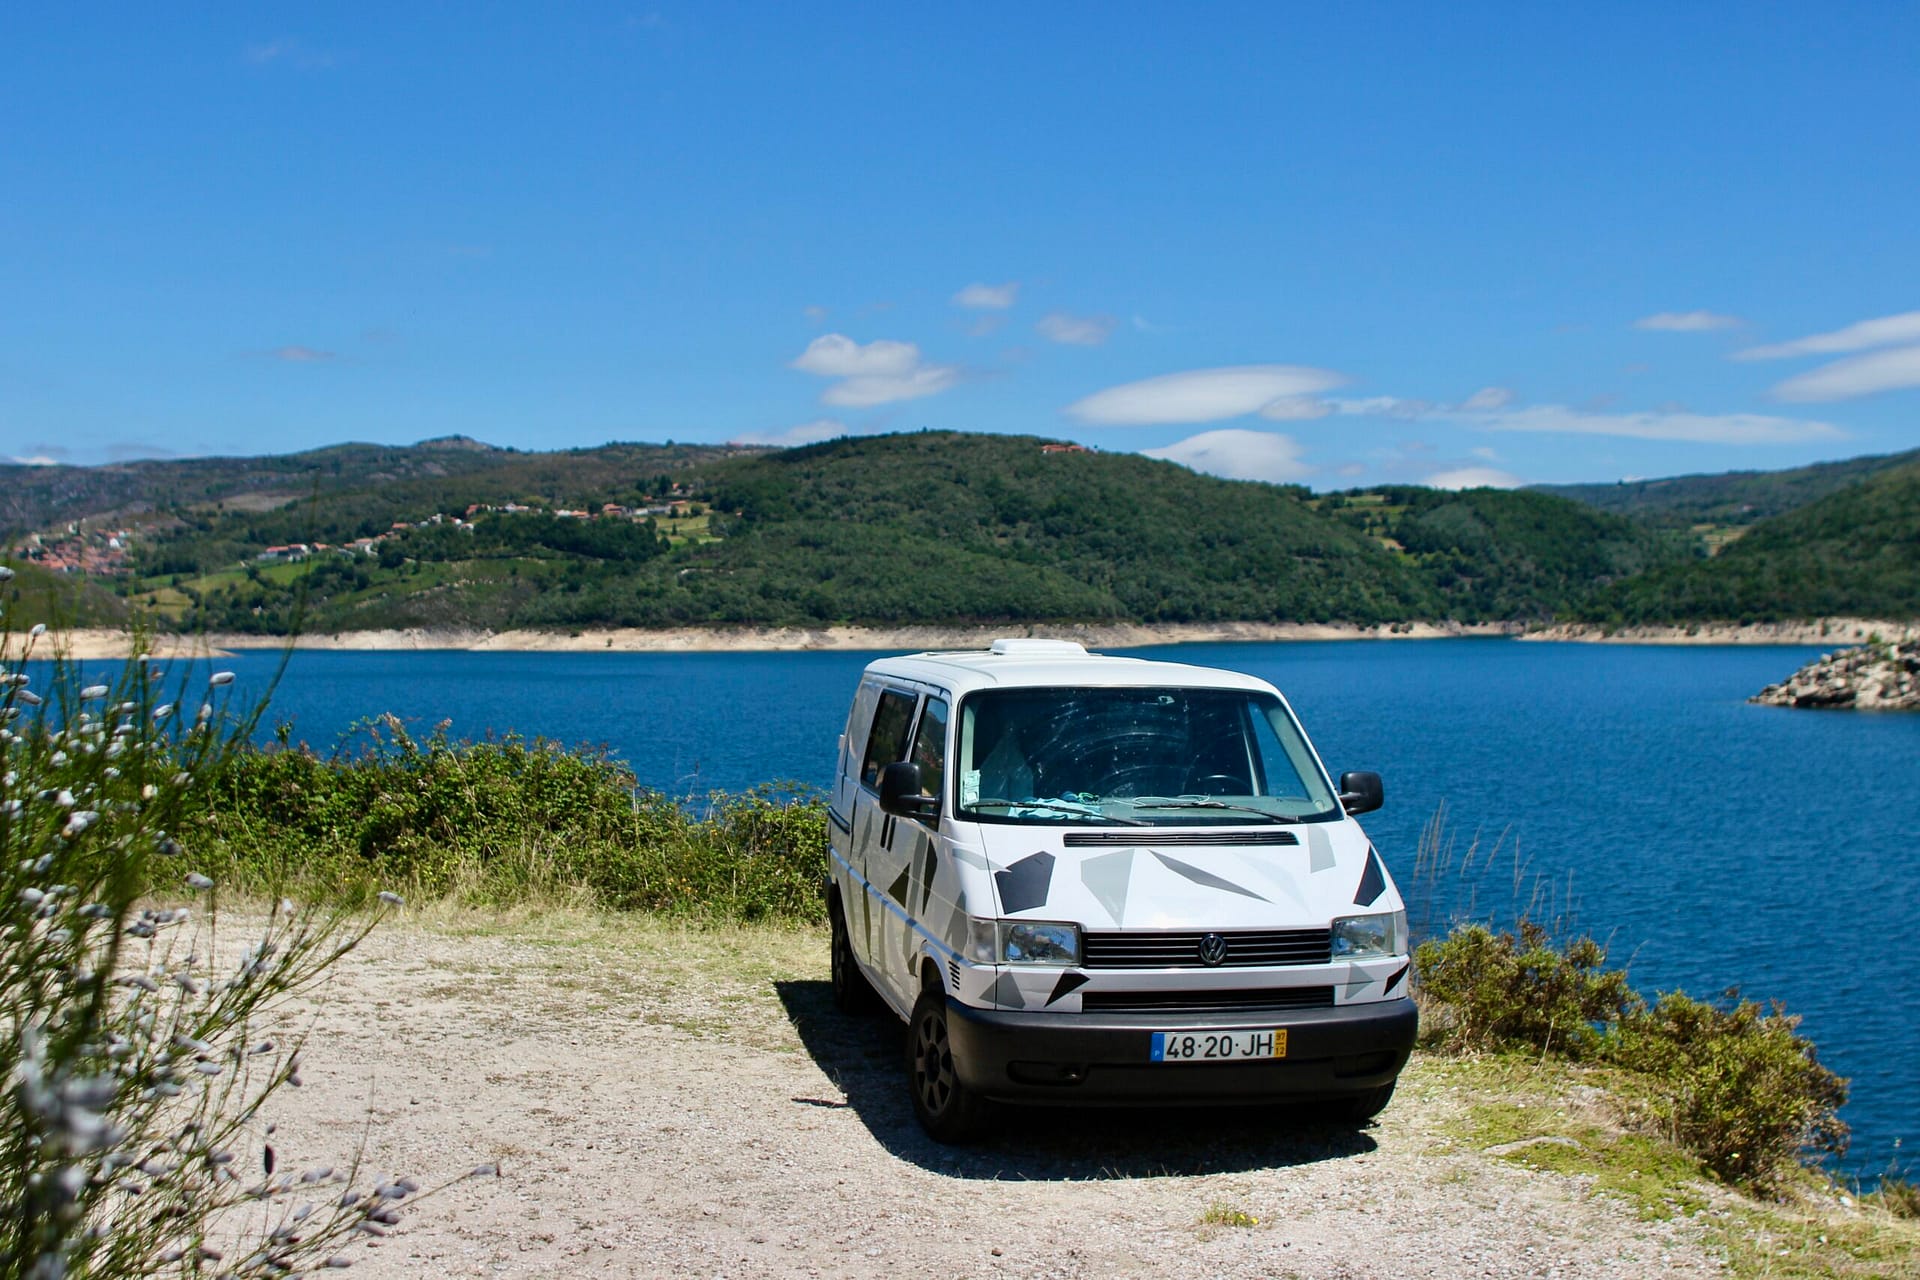 VW Transporter T4 in lake front photo